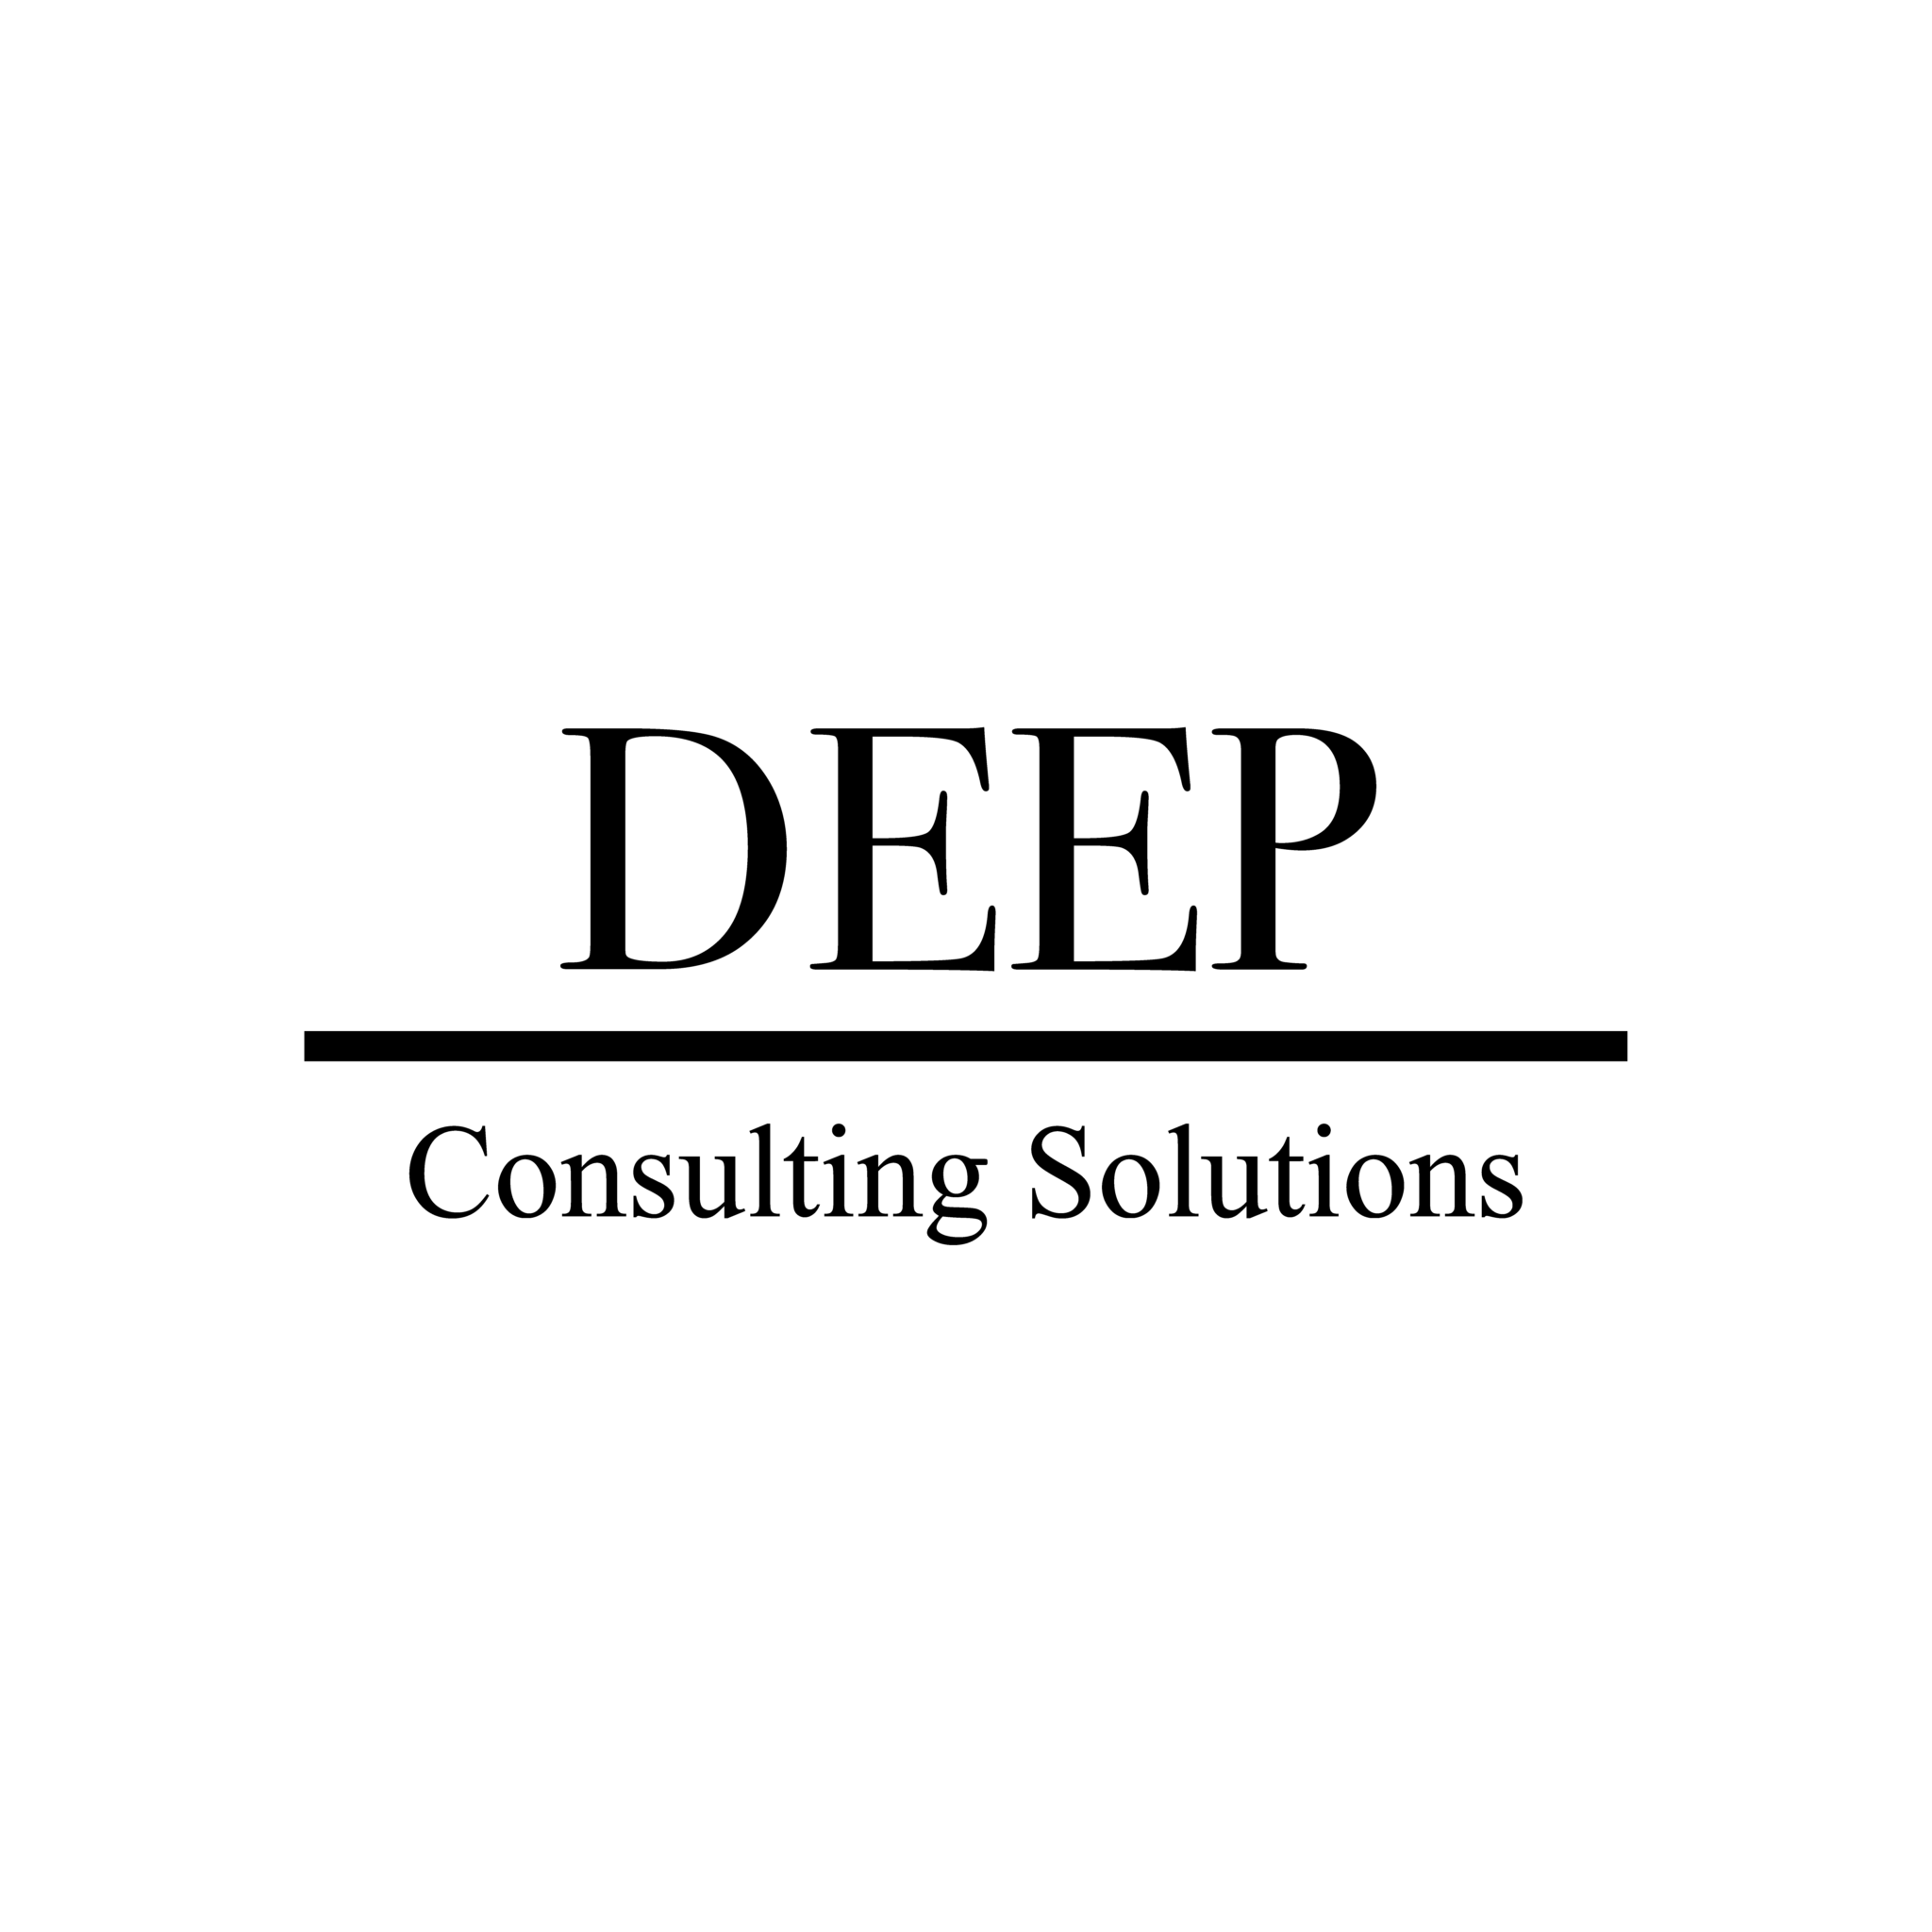 Deep Consulting Solutions